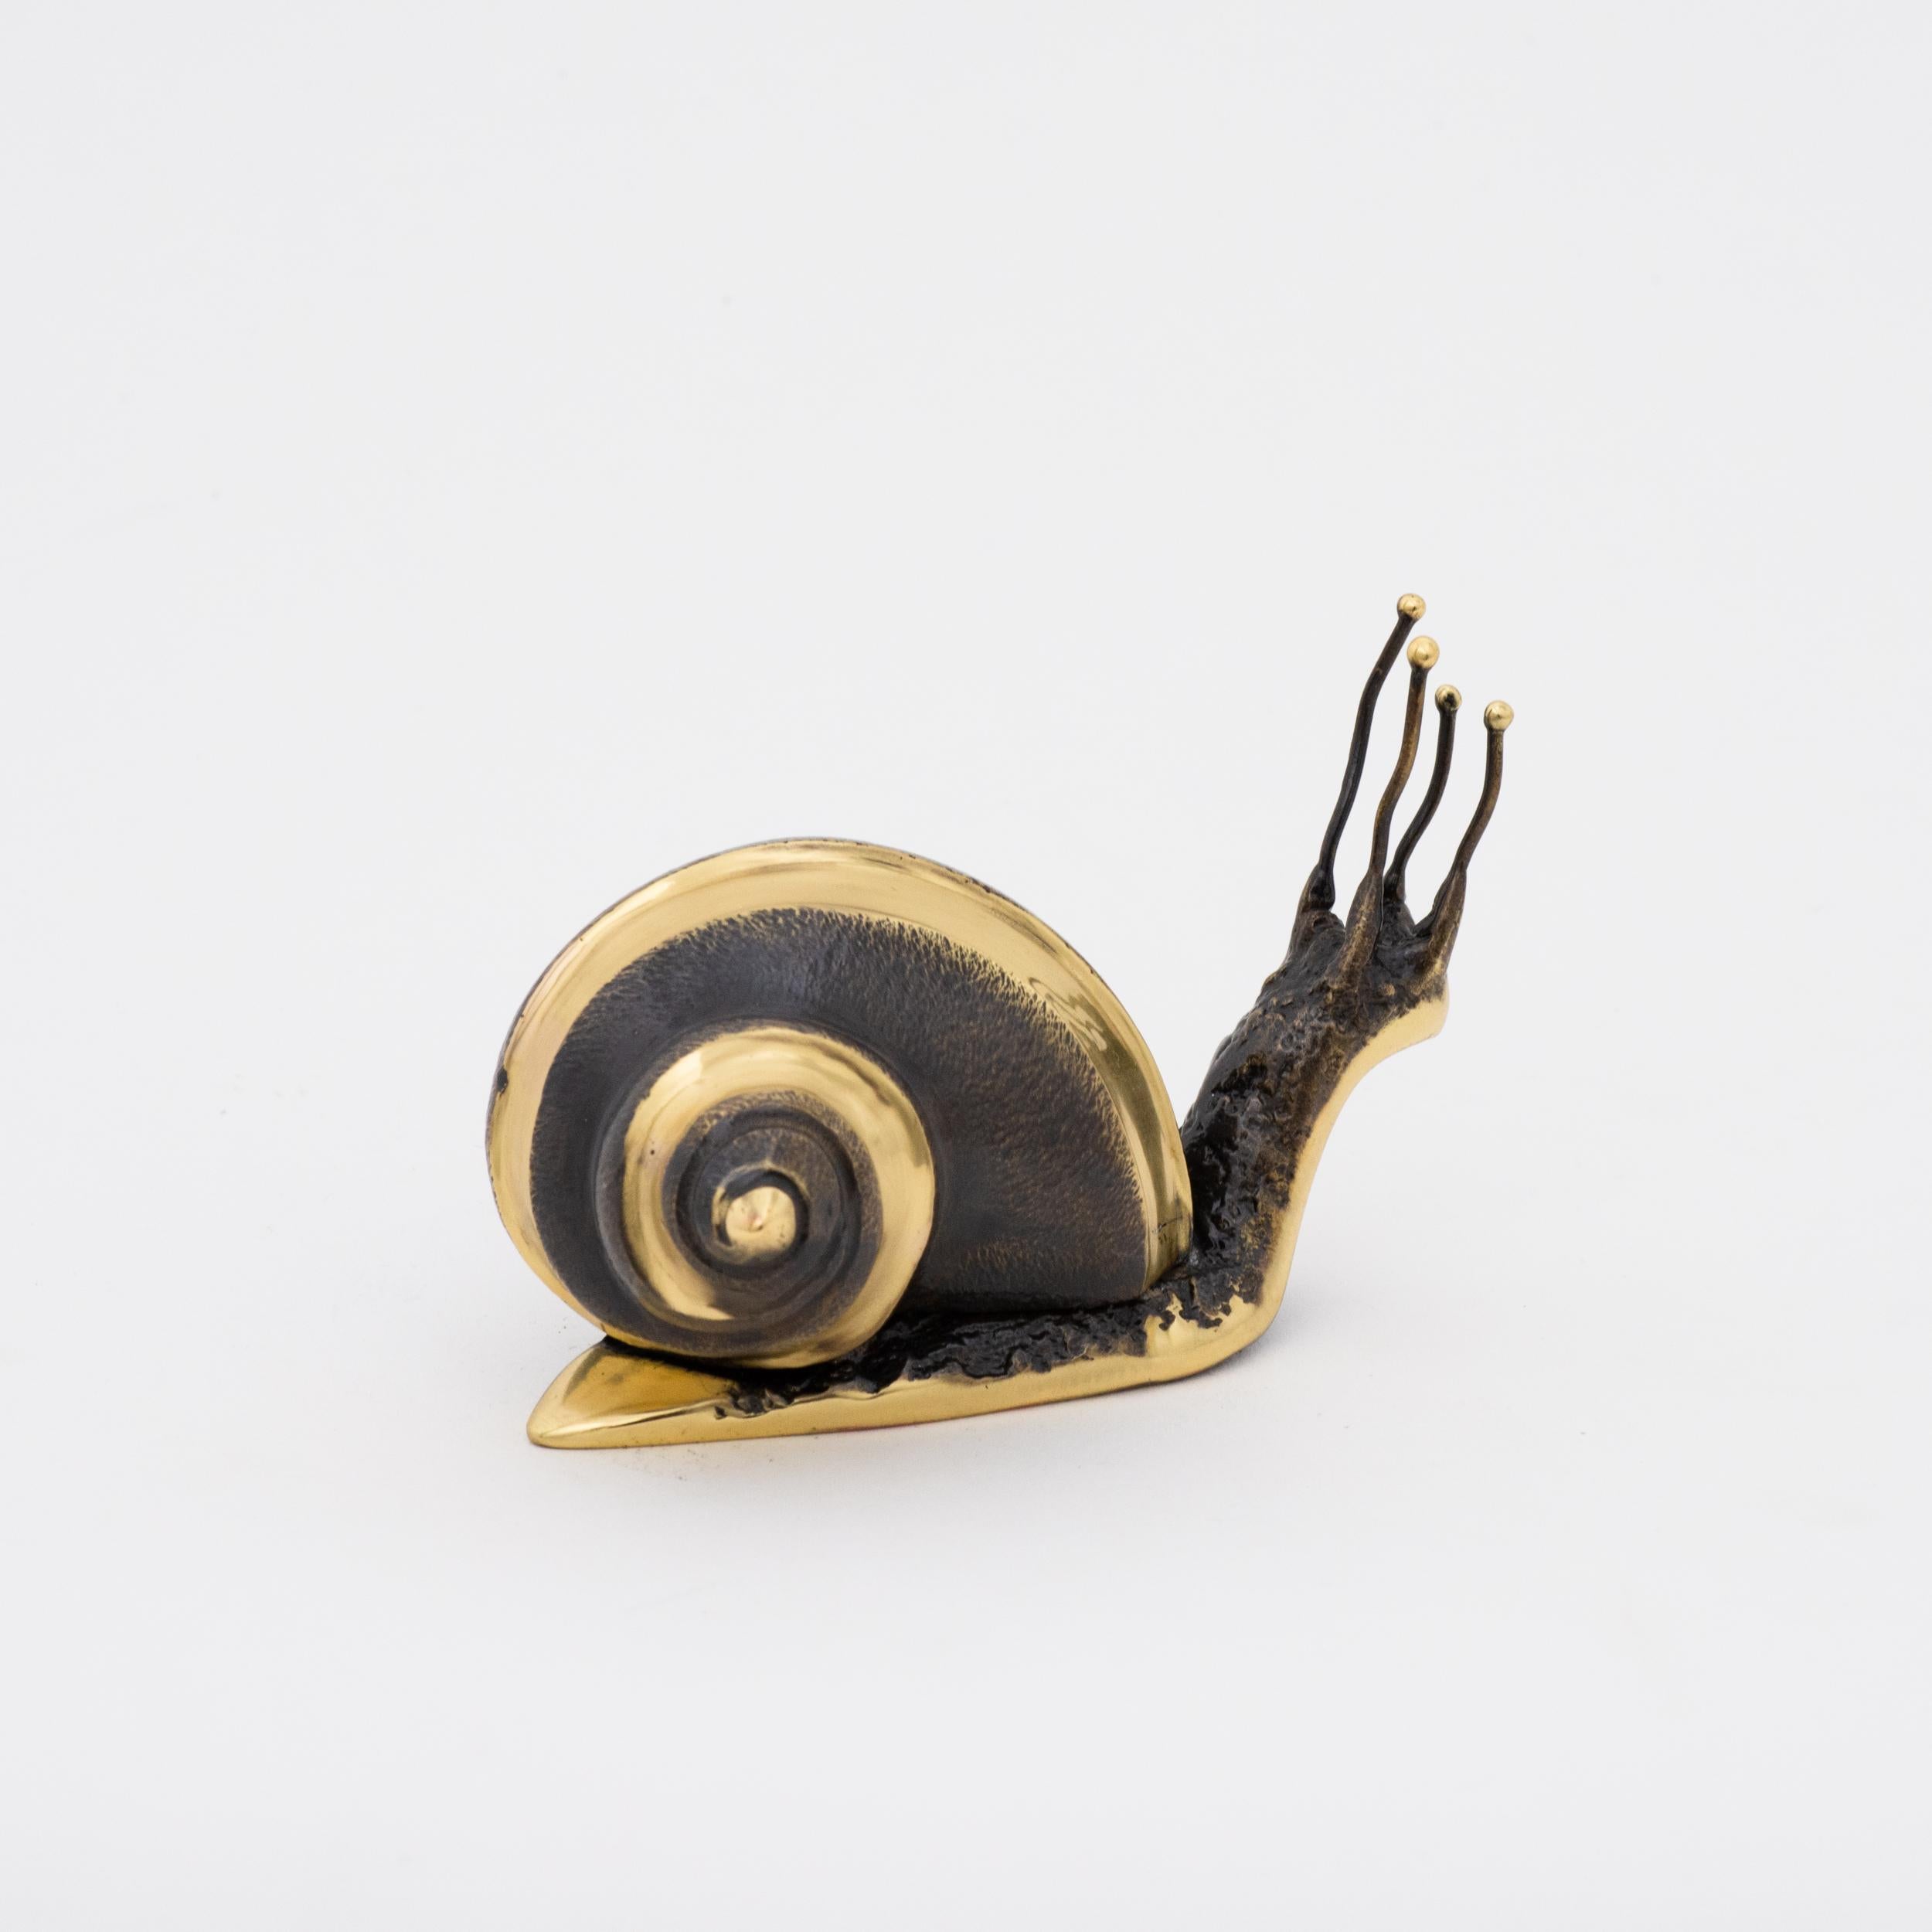 Indian Handmade Cast Brass Decorative Snail Large Paperweight For Sale